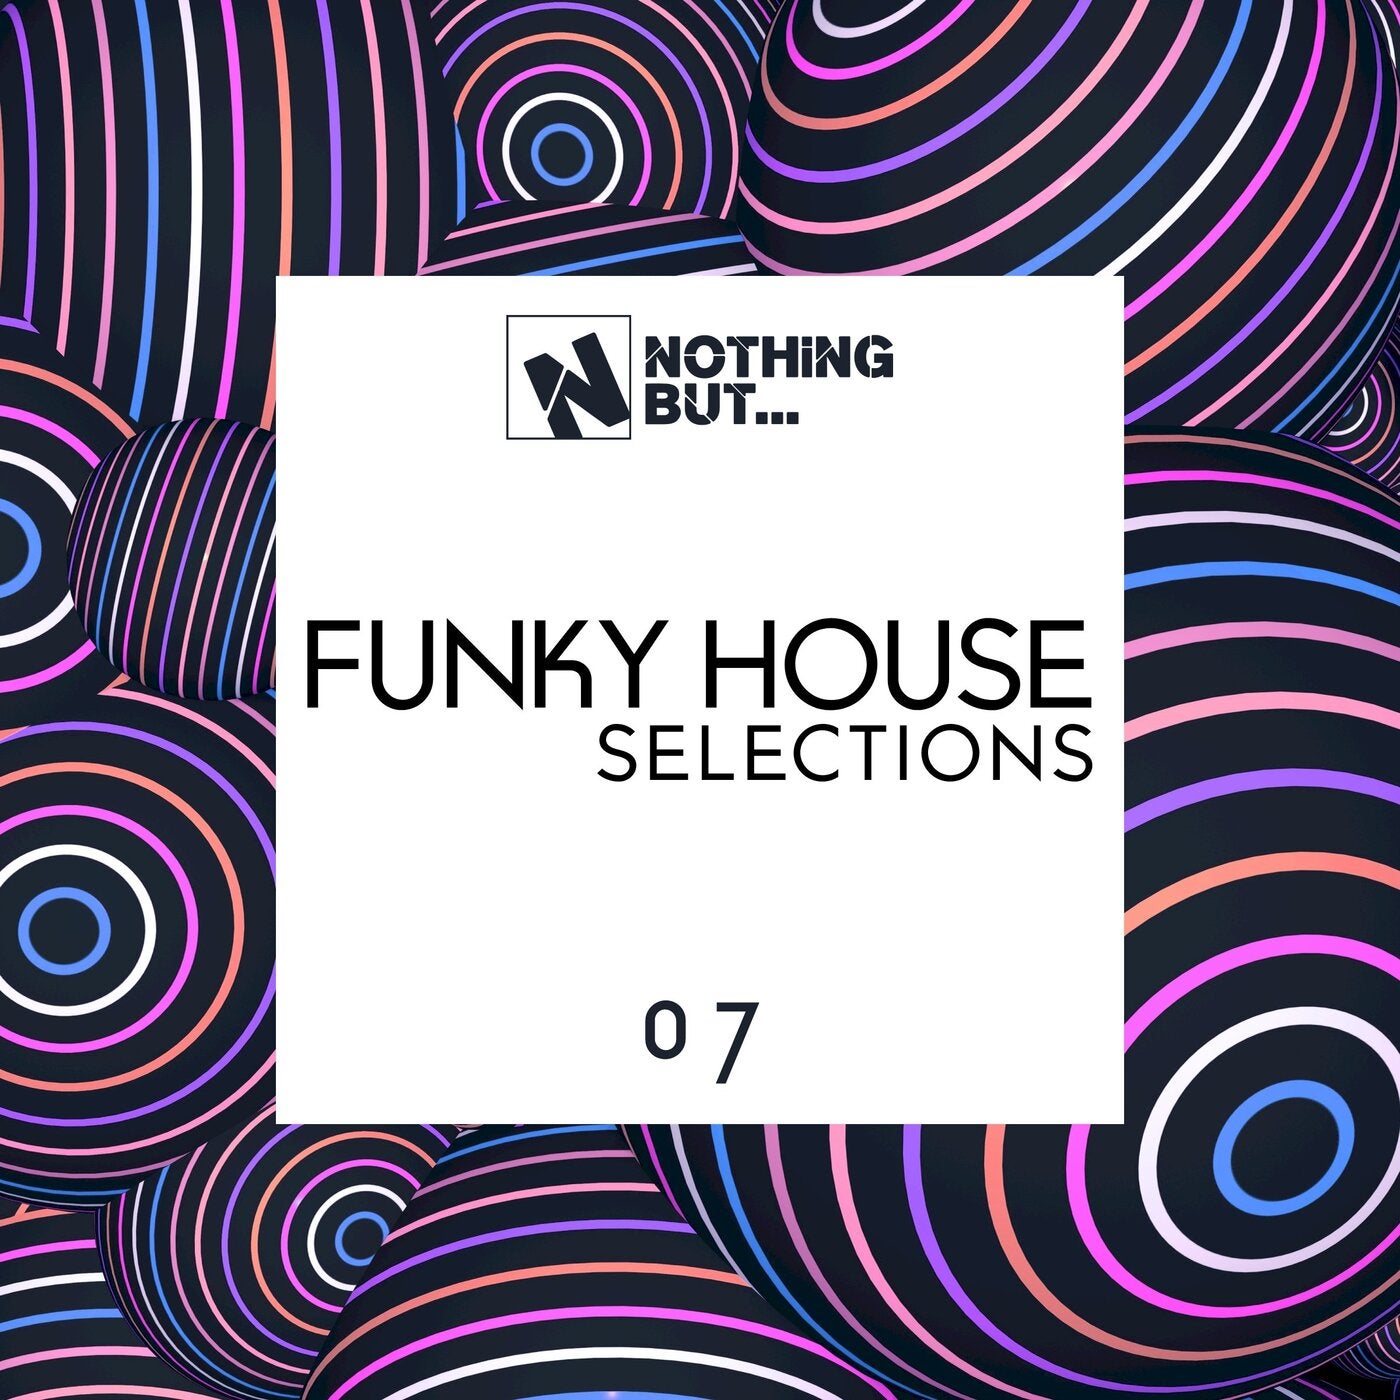 Nothing But... Funky House Selections, Vol. 07